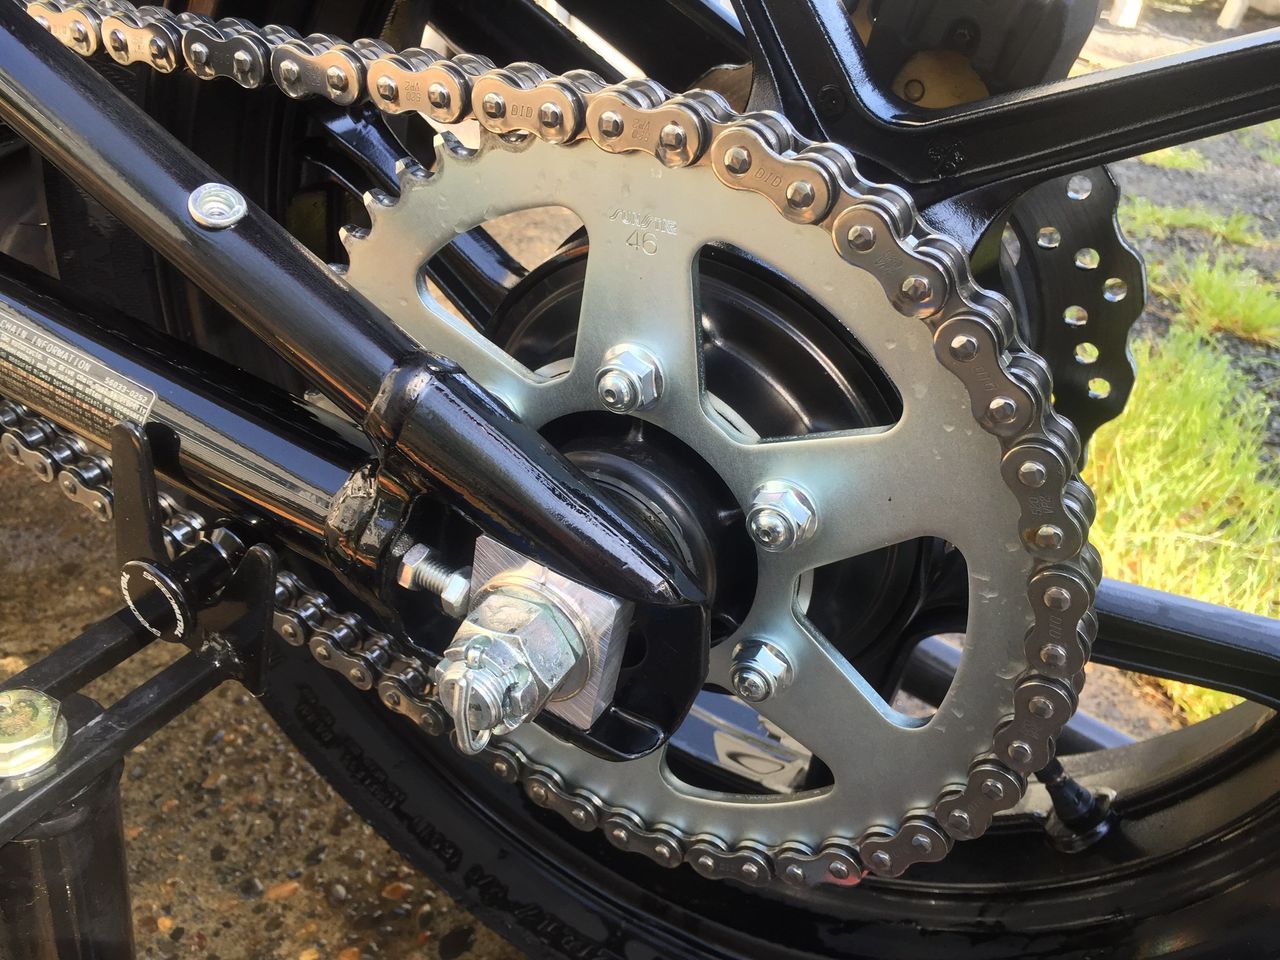 look at that sprocket sparkle!